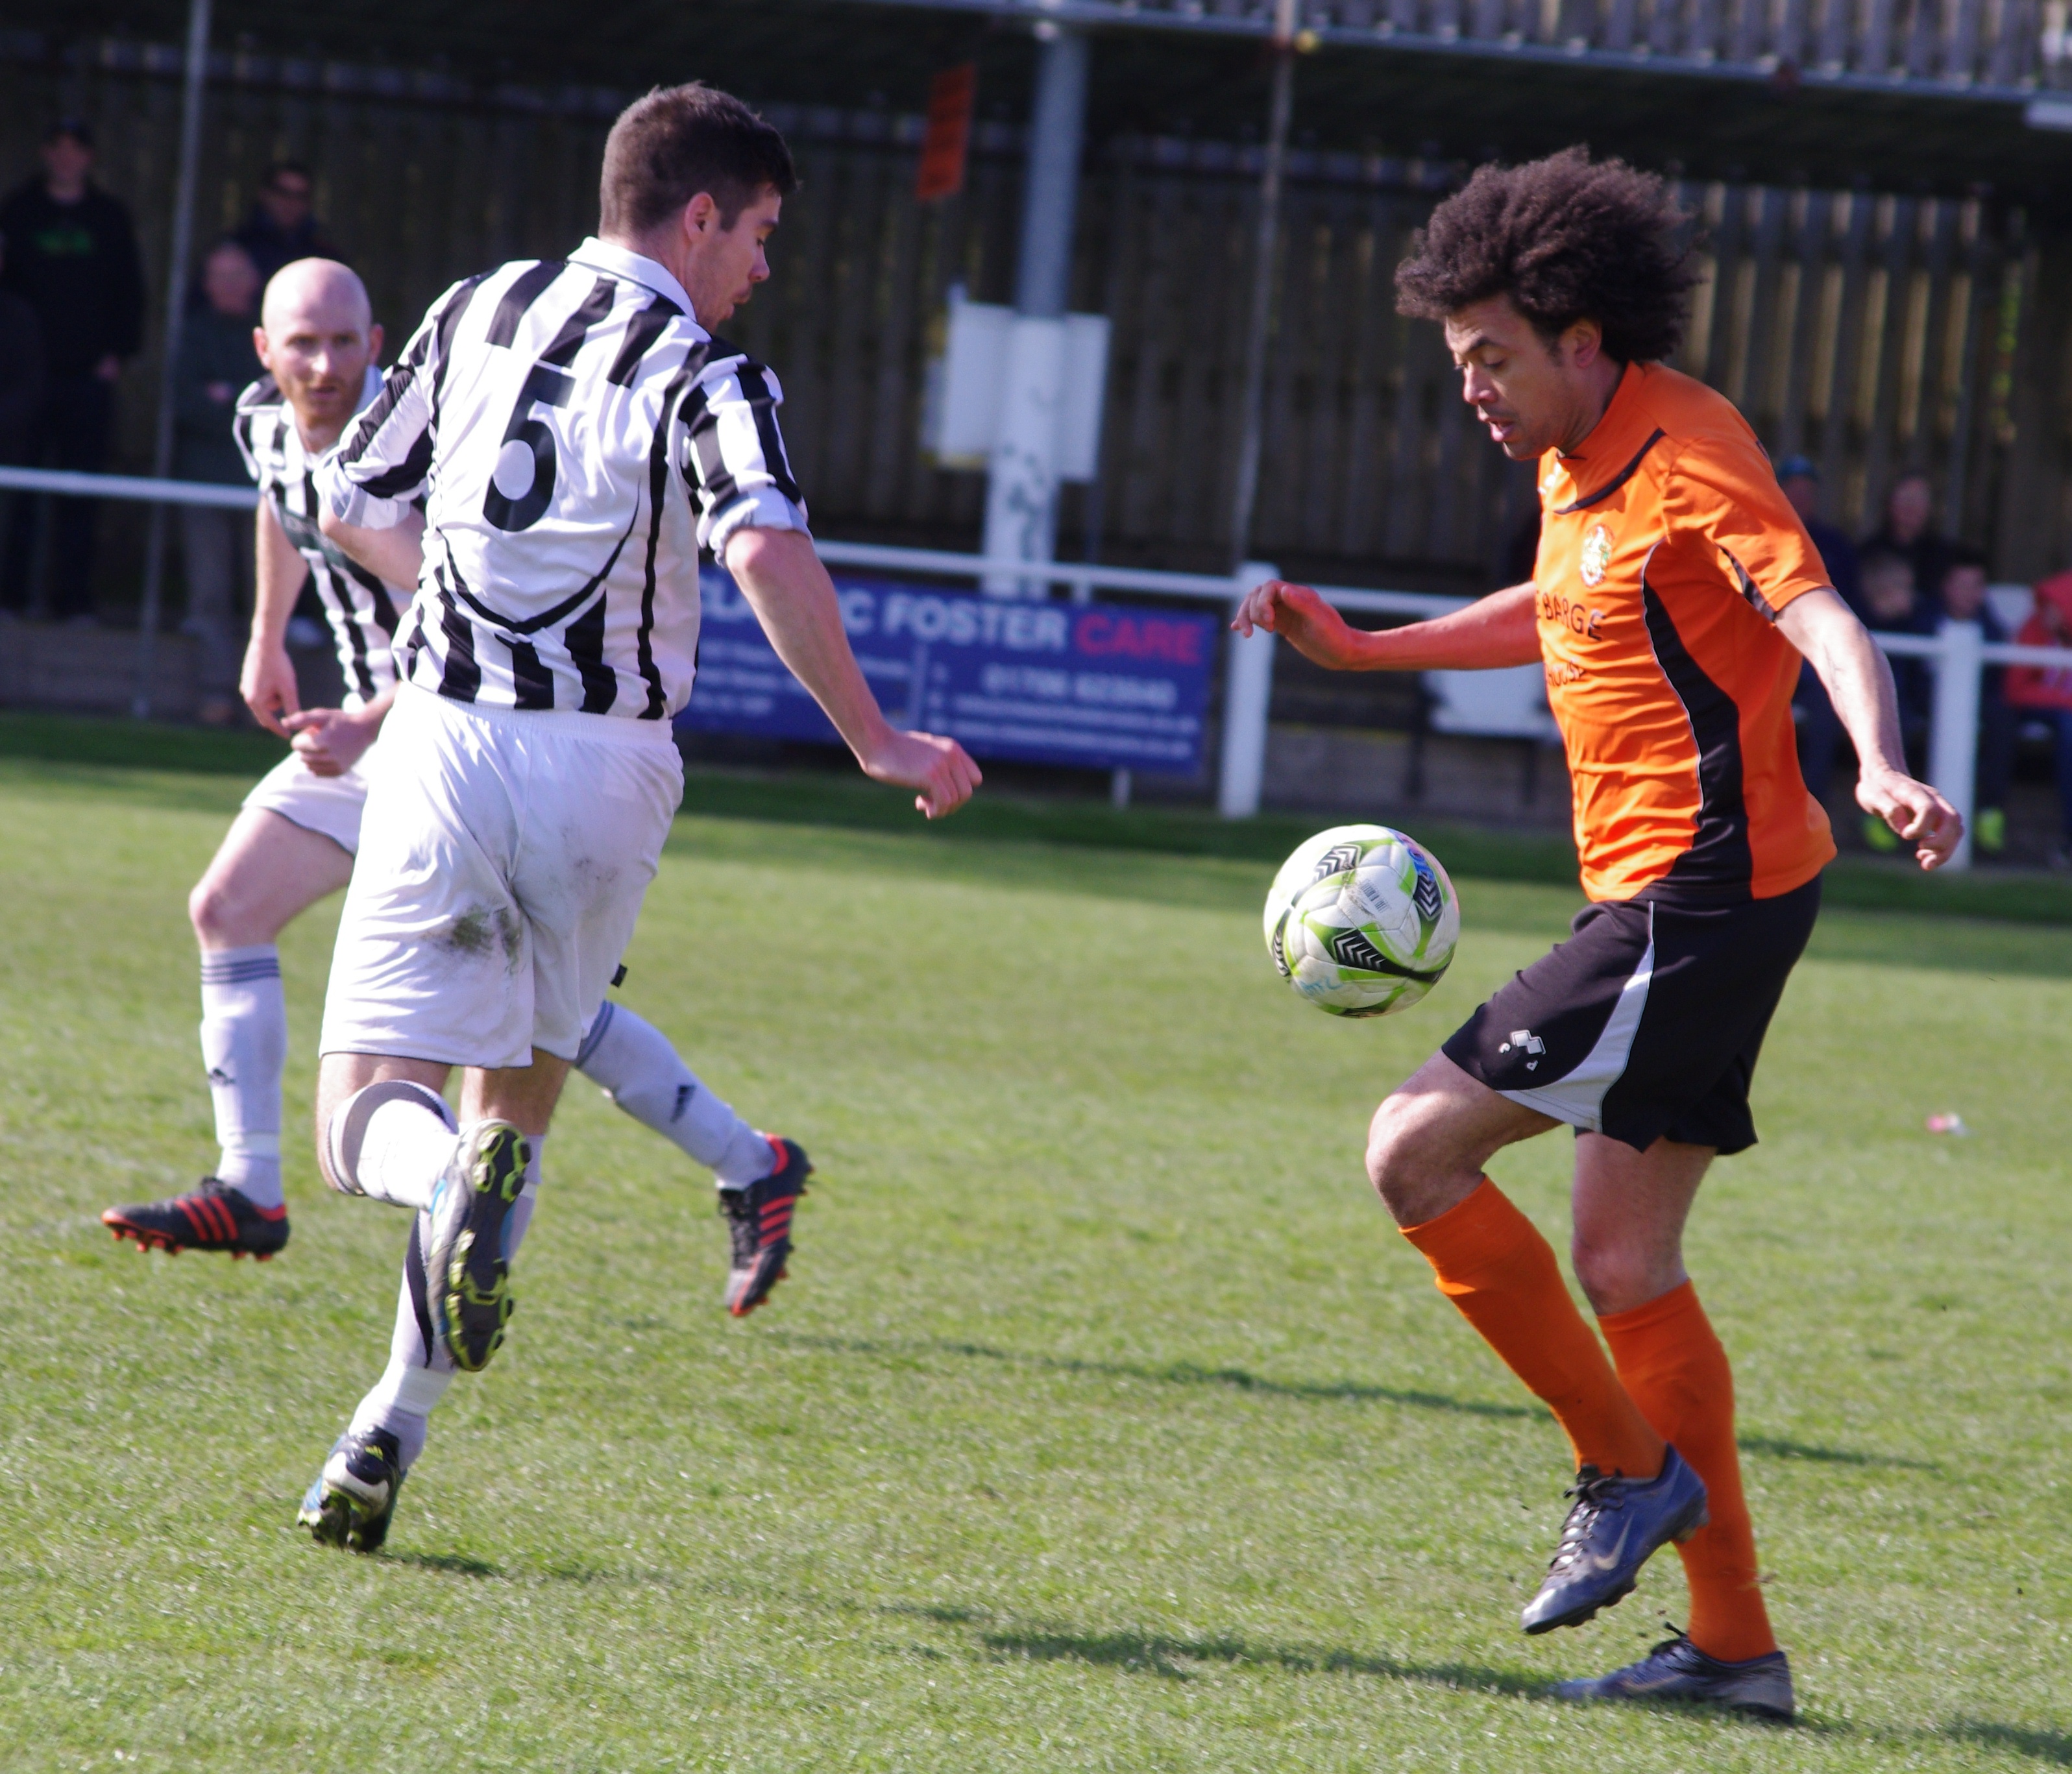 Jason Price in action for Brighouse Town in their title-winning 2-0 win over Retford United